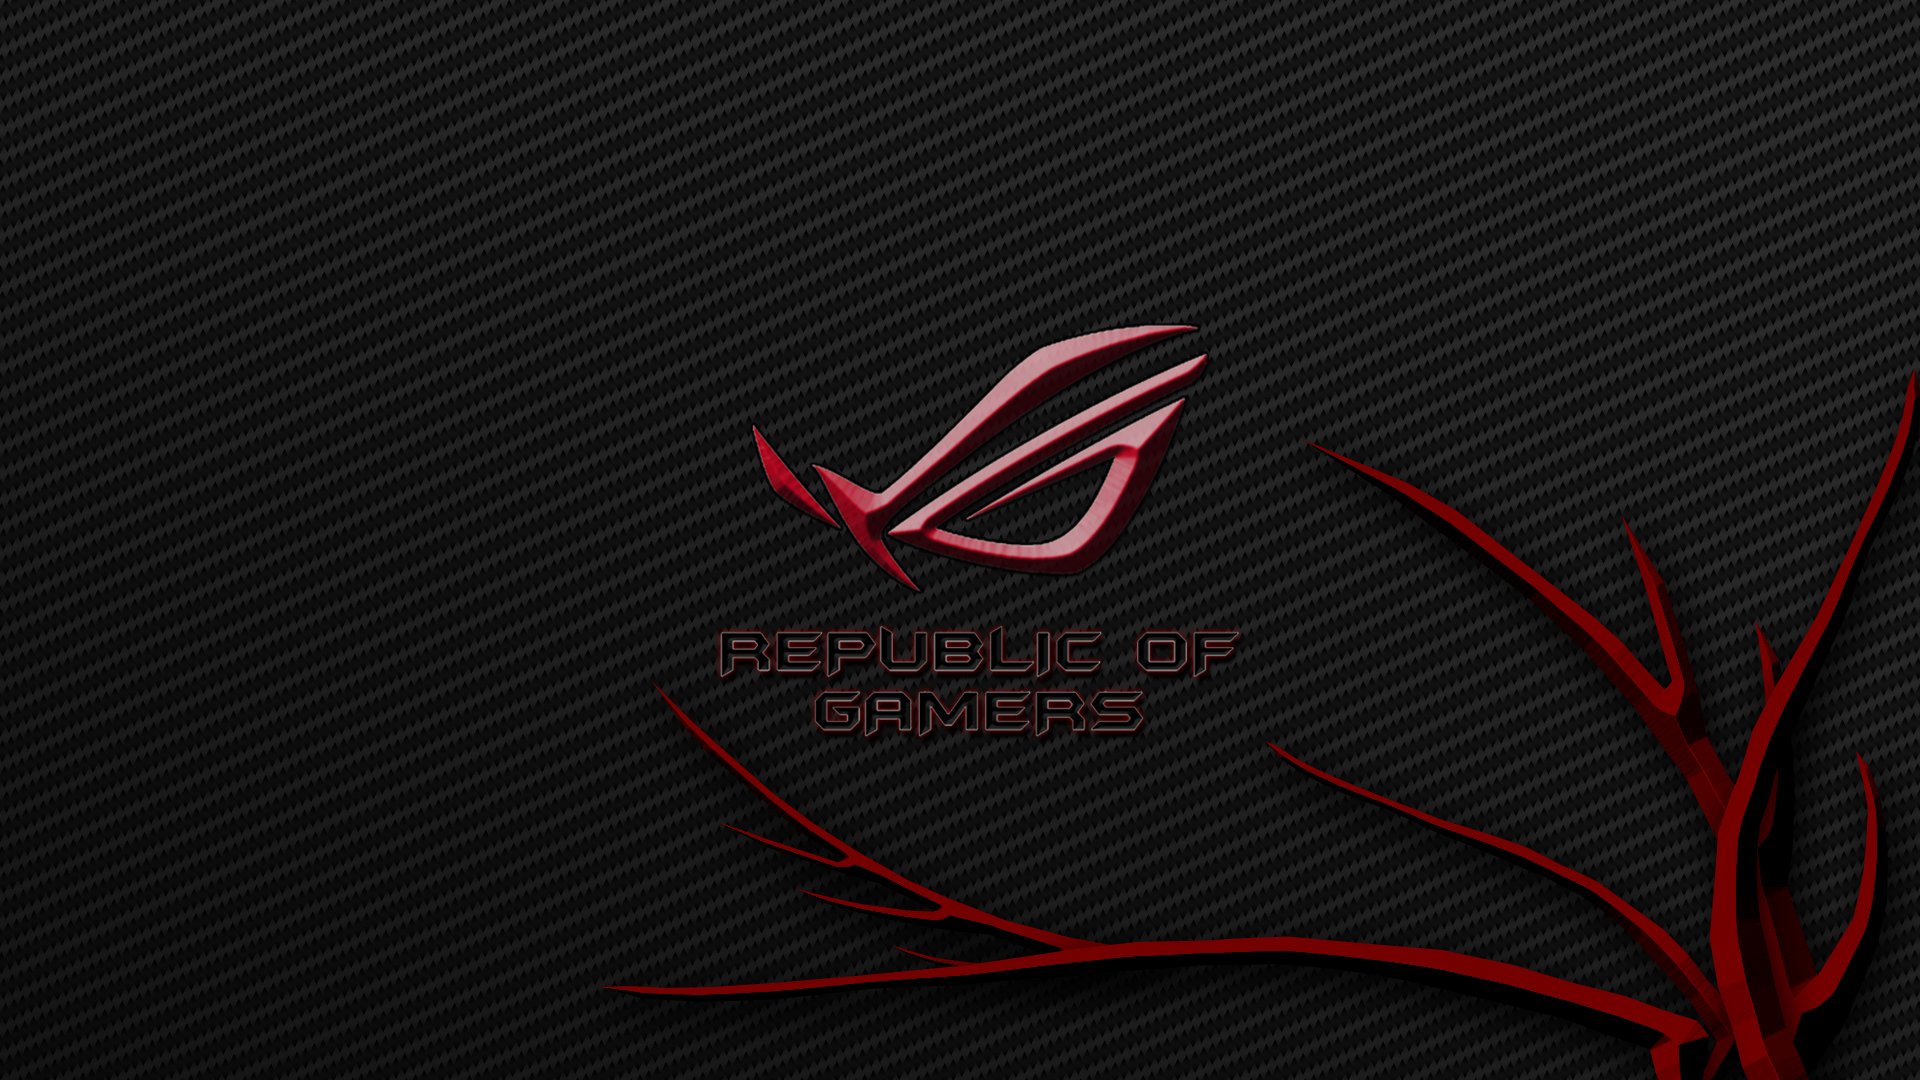 Republic Of Gamers Wallpaper by wassupdoc 1920x1080